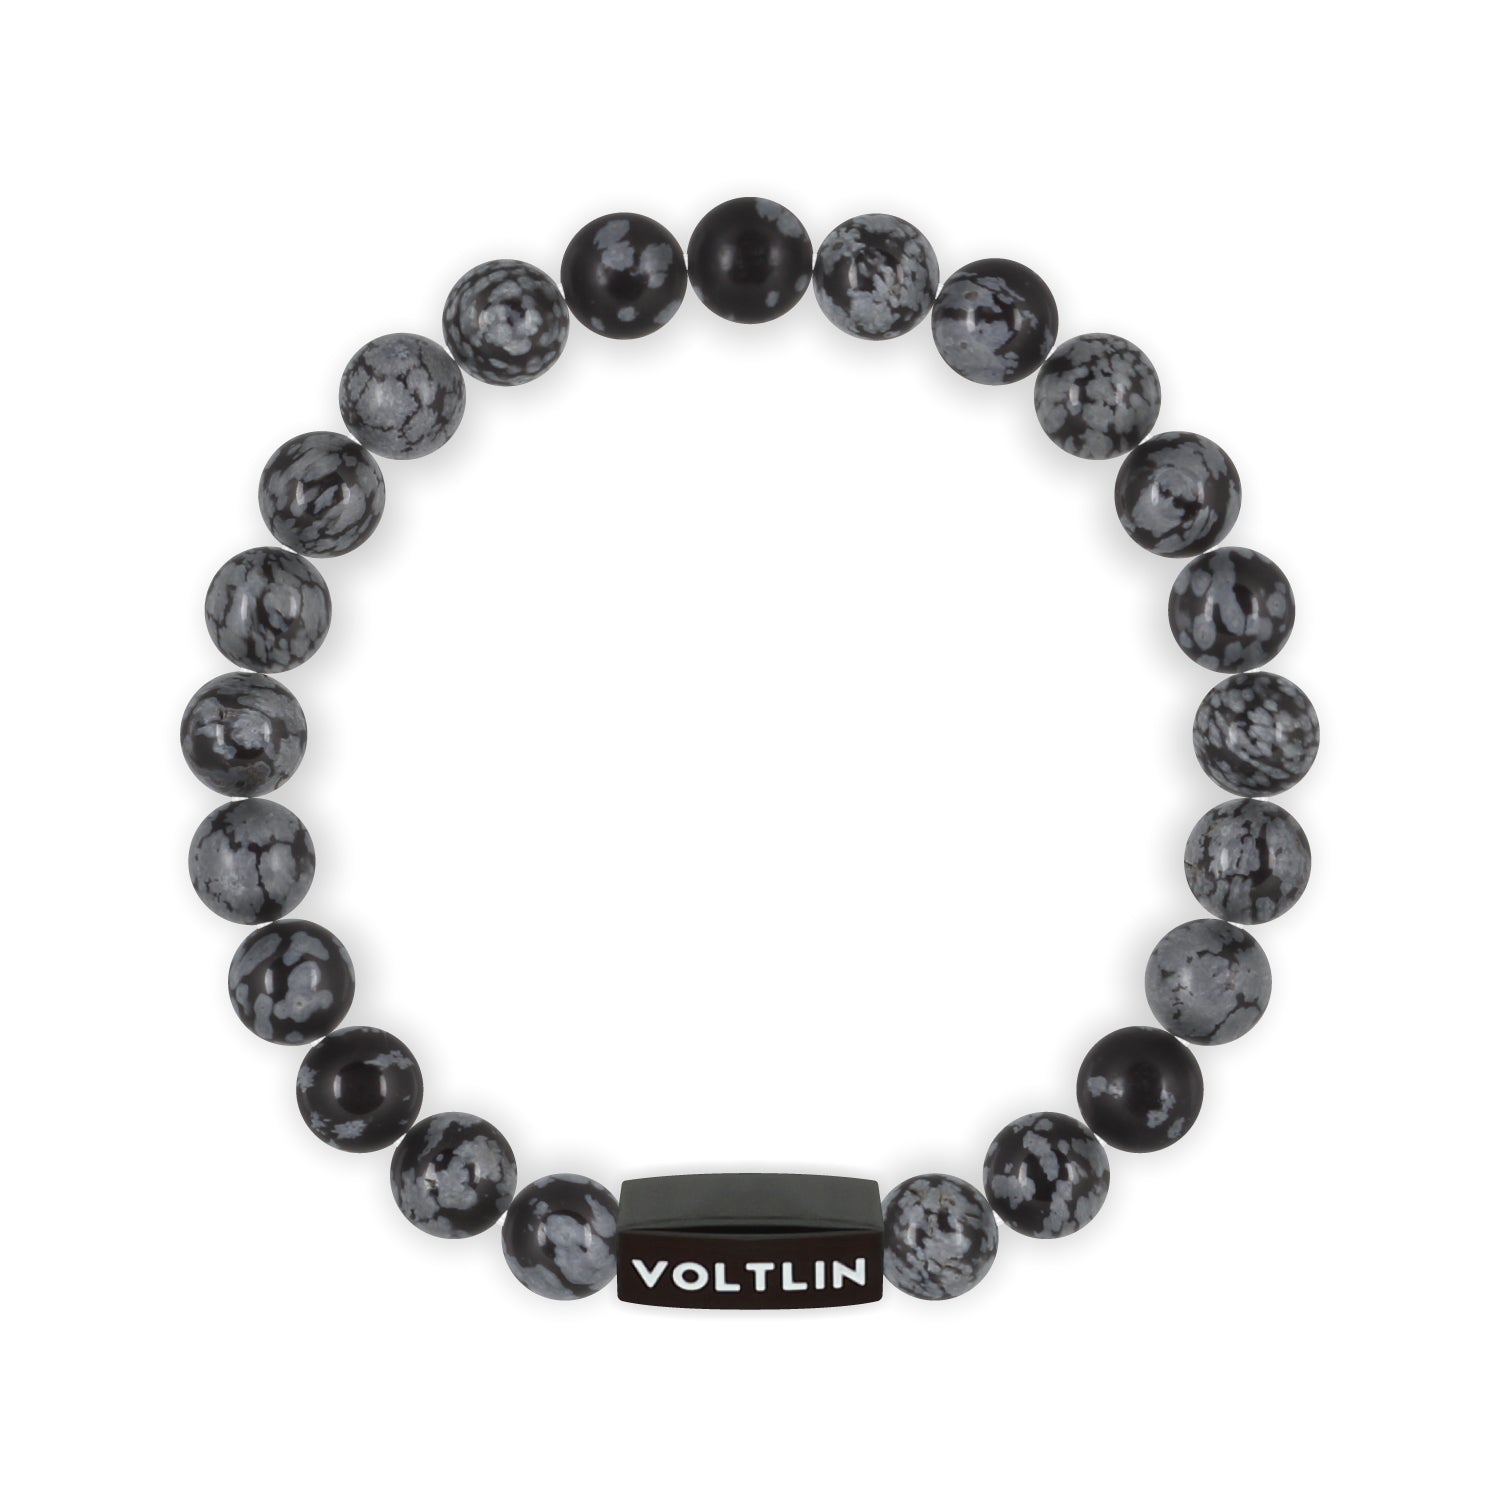 Front view of an 8mm Snowflake Obsidian crystal beaded stretch bracelet with black stainless steel logo bead made by Voltlin